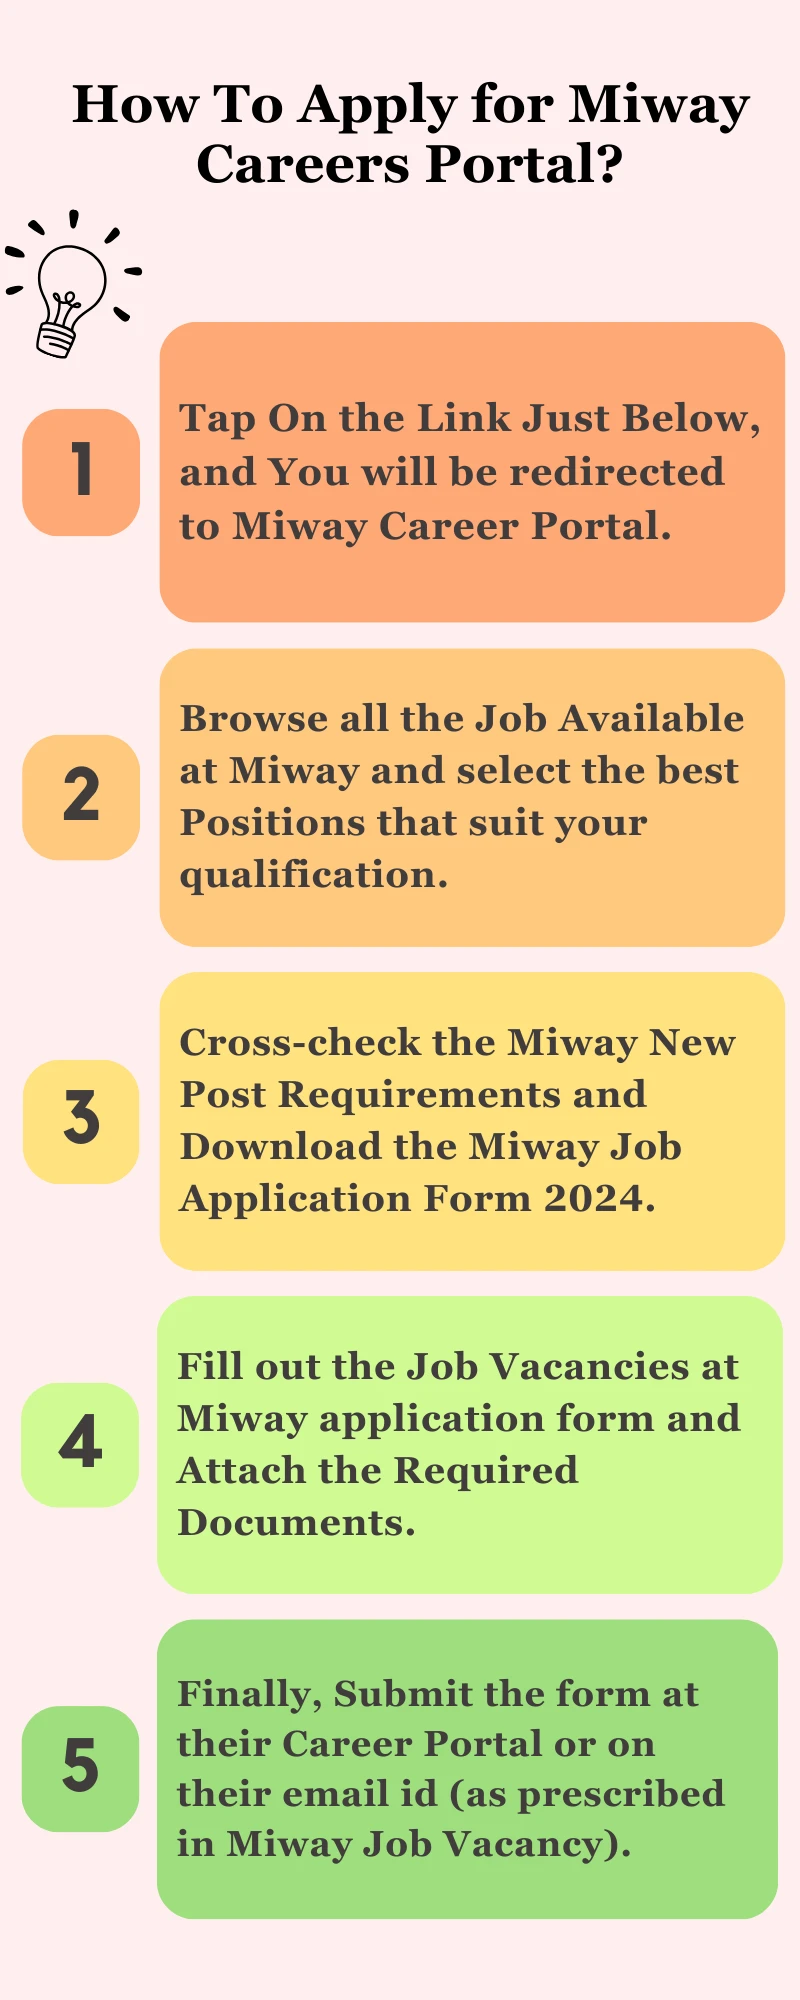 How To Apply for Miway Careers Portal?